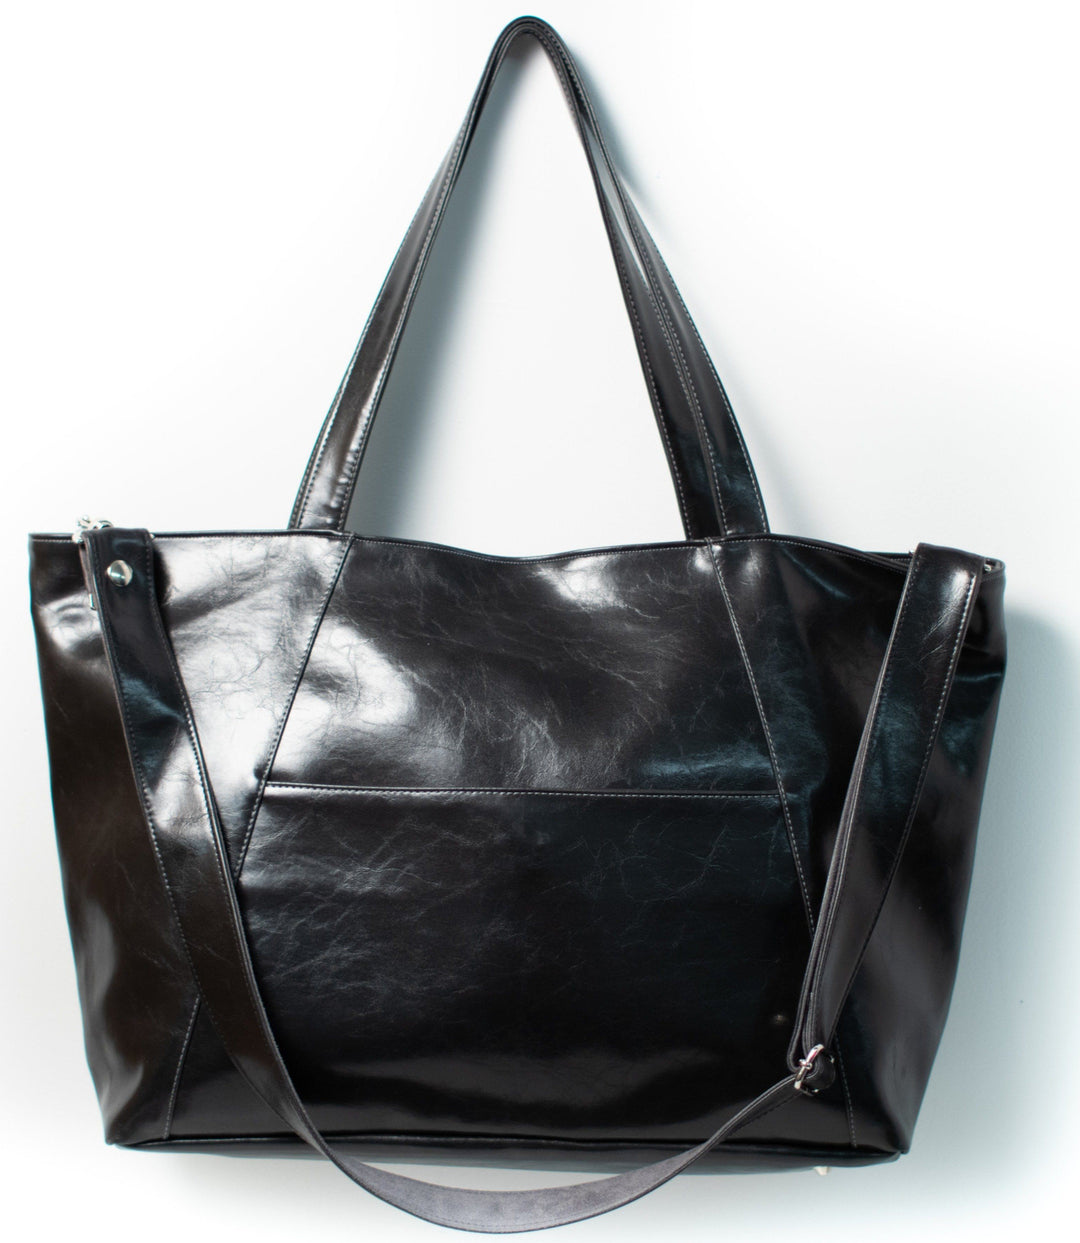 Womens overnight Tote Bag - XL Troubadour Weekender Tote - Black Vegan Leather made in usa